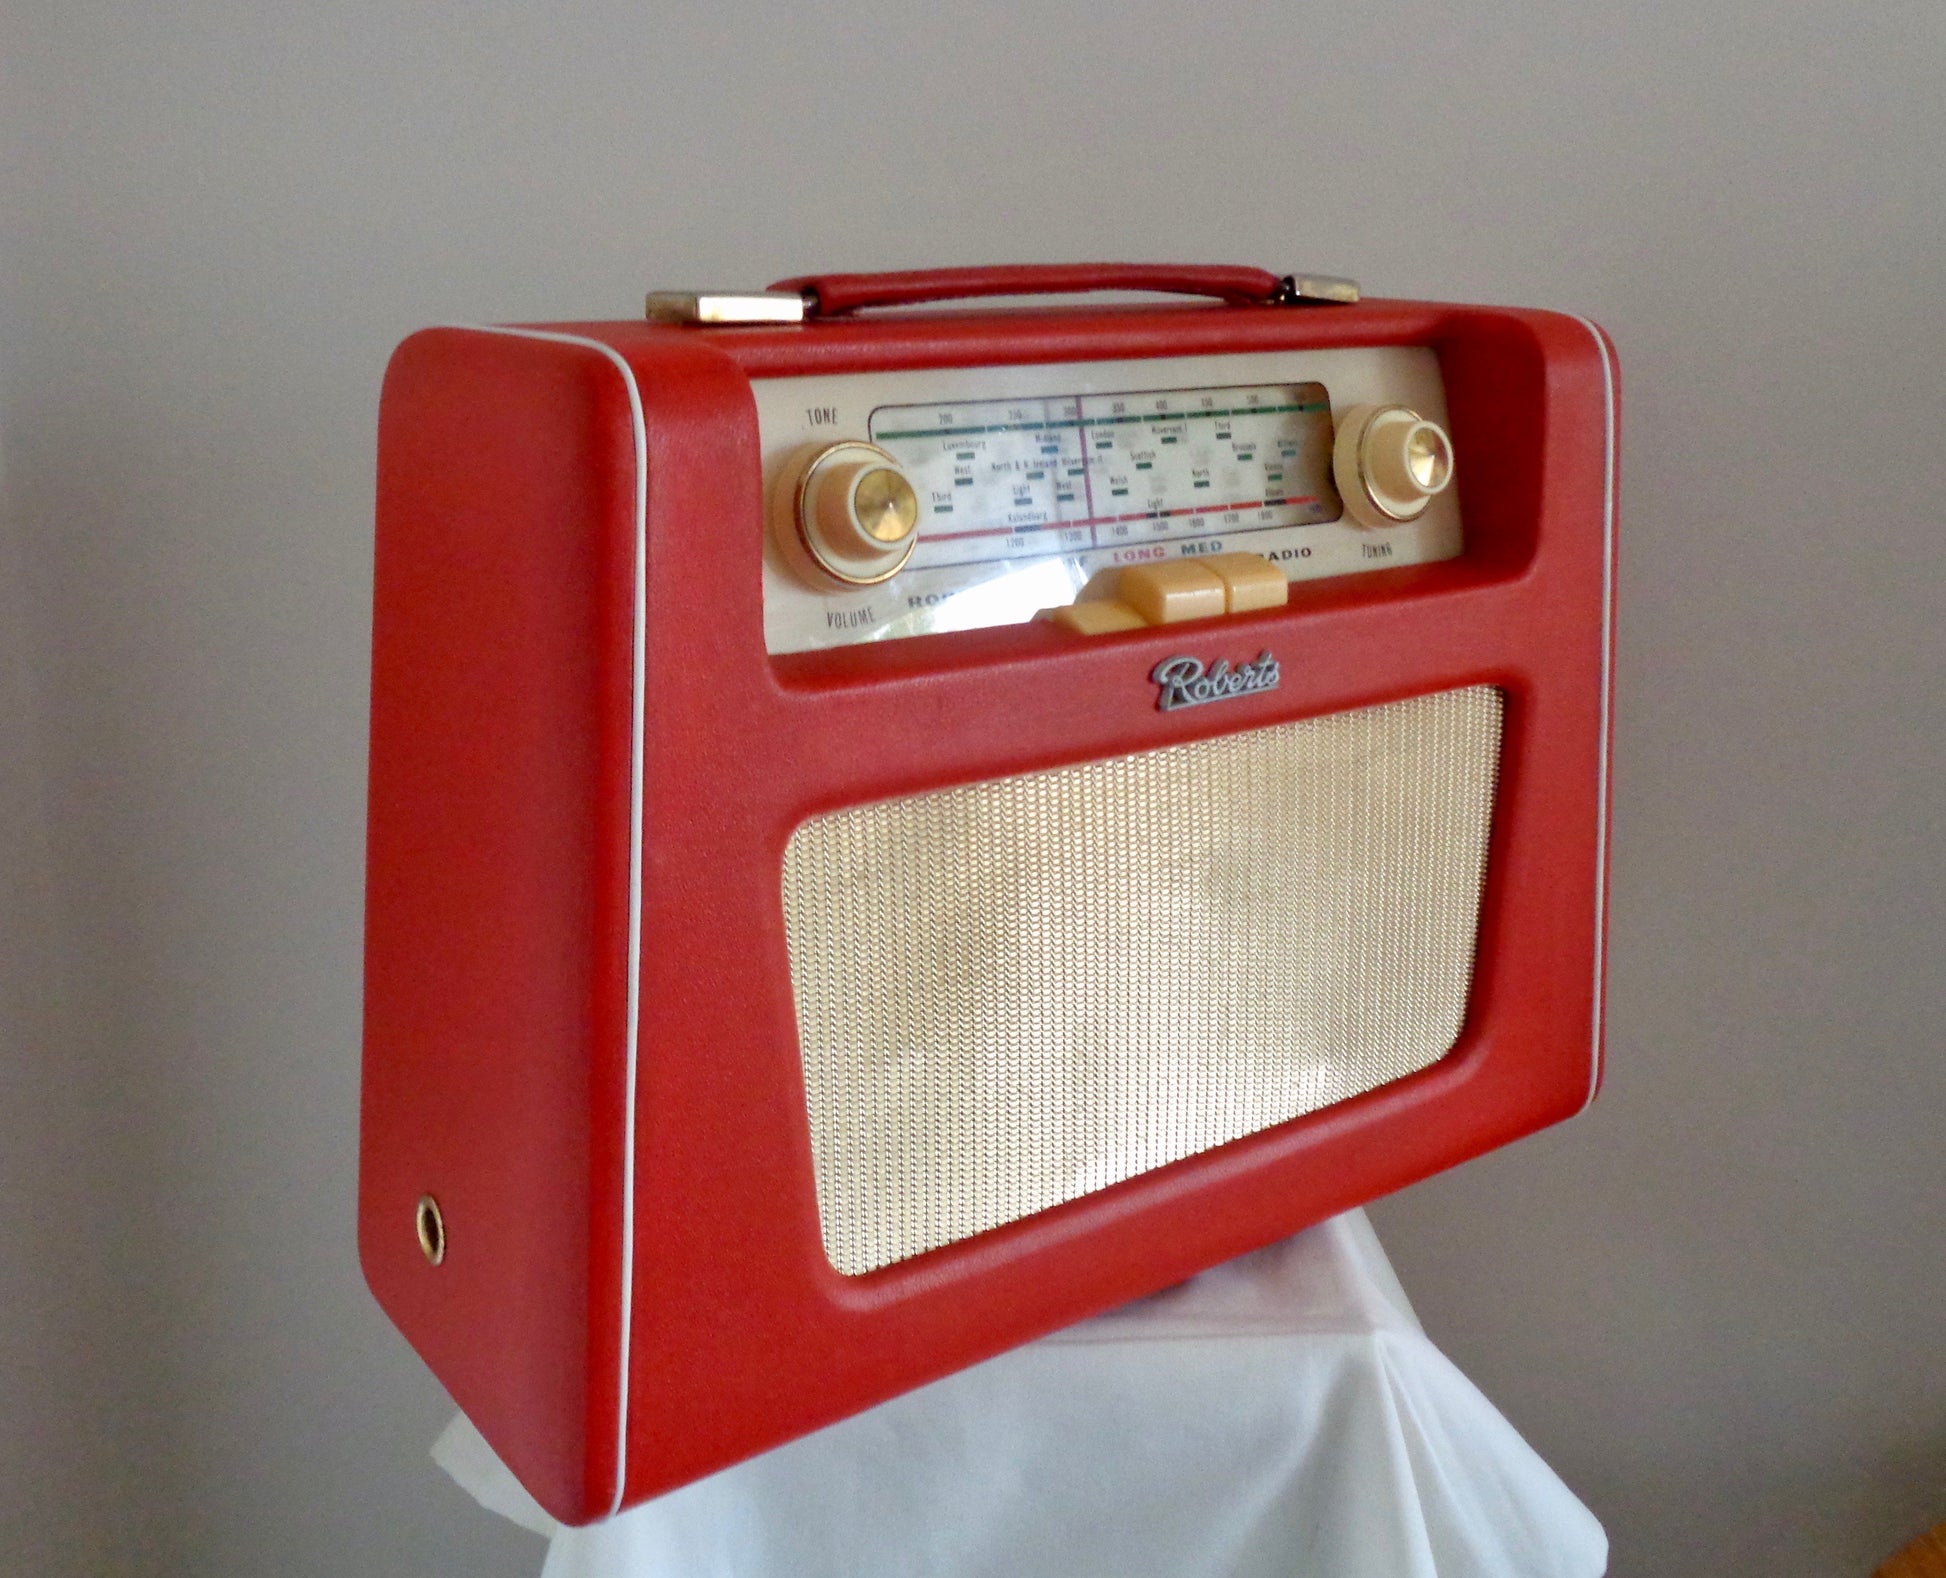 https://mullard-antiques-and-collectibles.myshopify.com/collections/vintage-antique-radios-and-equipment